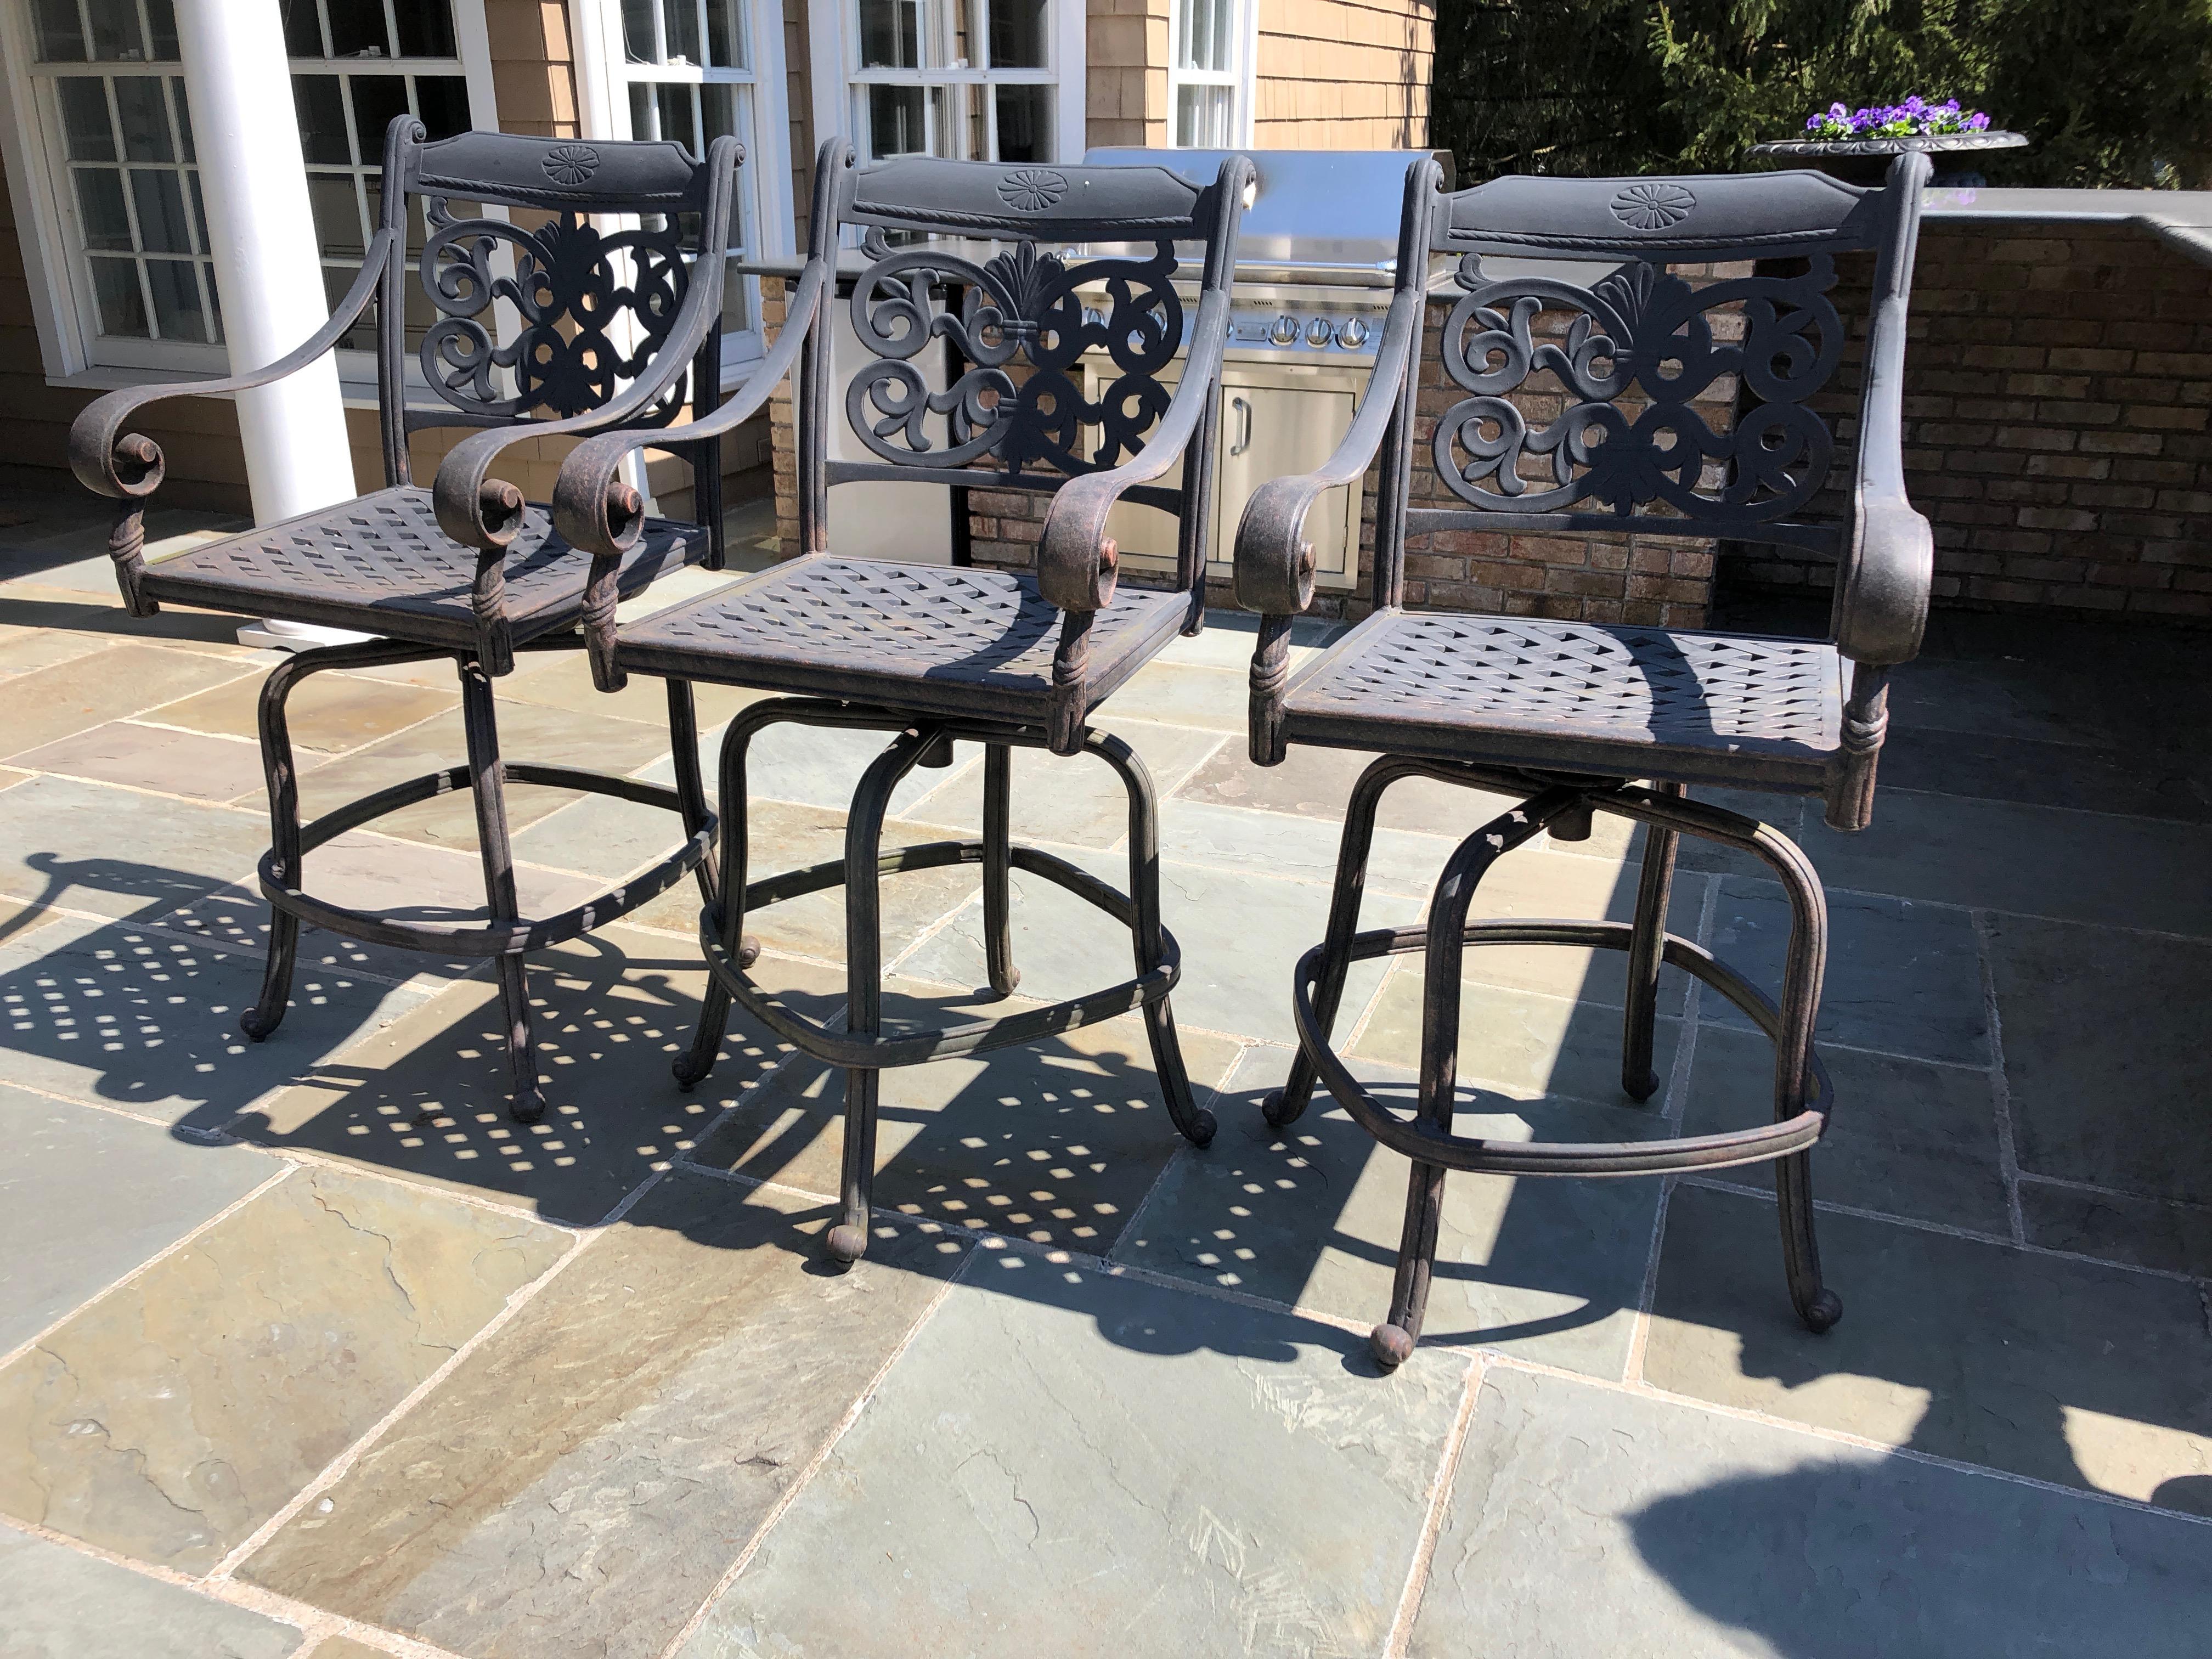 Contemporary Trio of Handsome Large Outdoor Swivel Cast Aluminum Bar Stools for the Patio